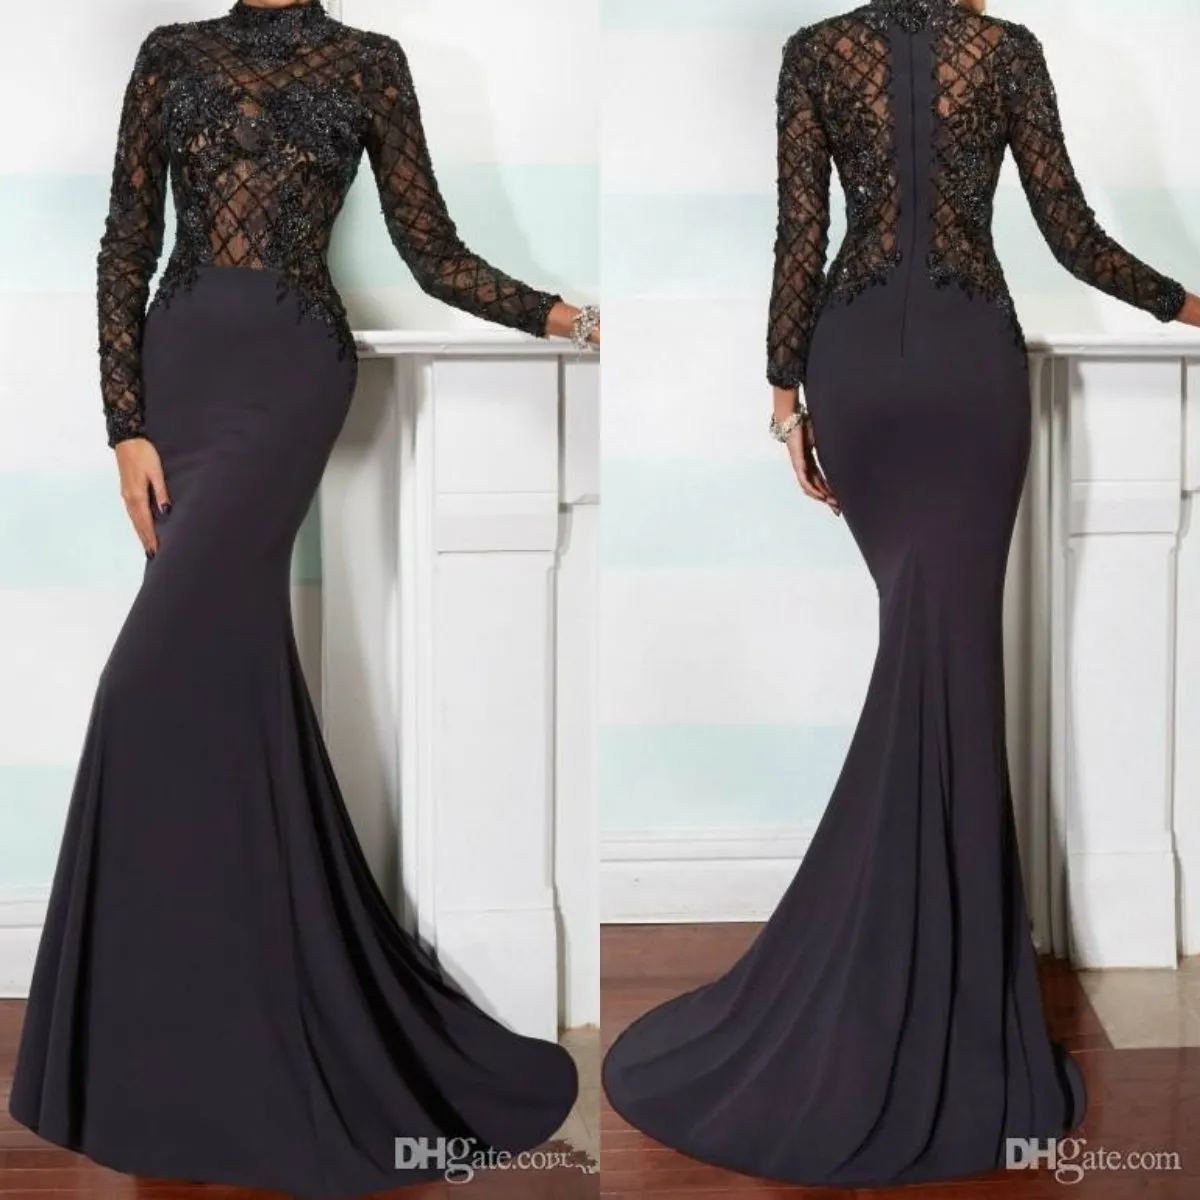 Elegant Mermaid Mother of the Bride Dresses High Neck Long Sleeve Lace Applique Black Beads Crystals Chapel Train Evening Gowns